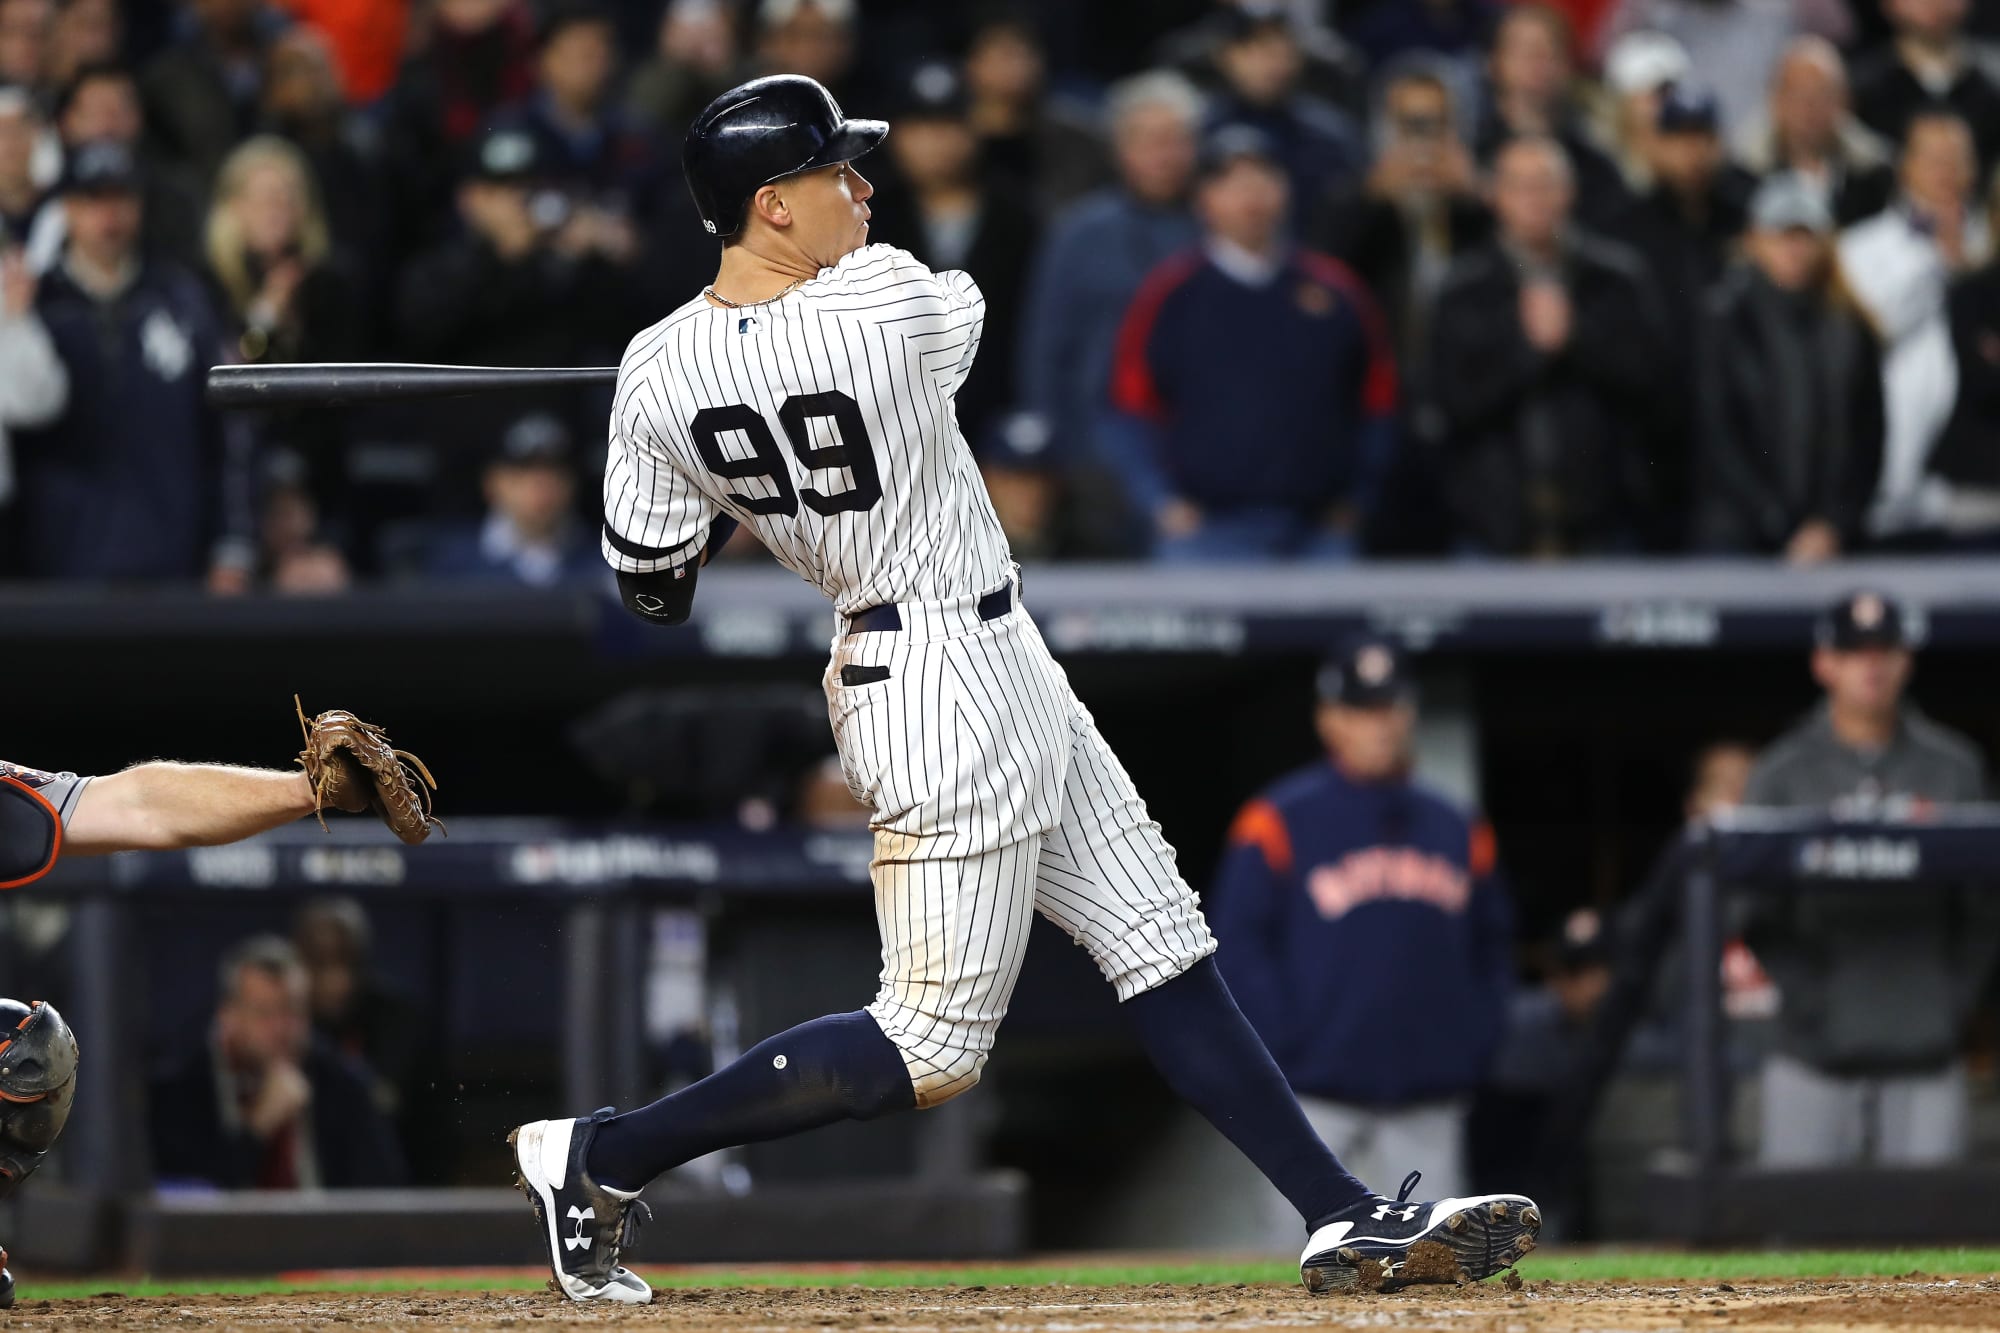 New York Yankees: Who will lead the team in home runs in 2018?